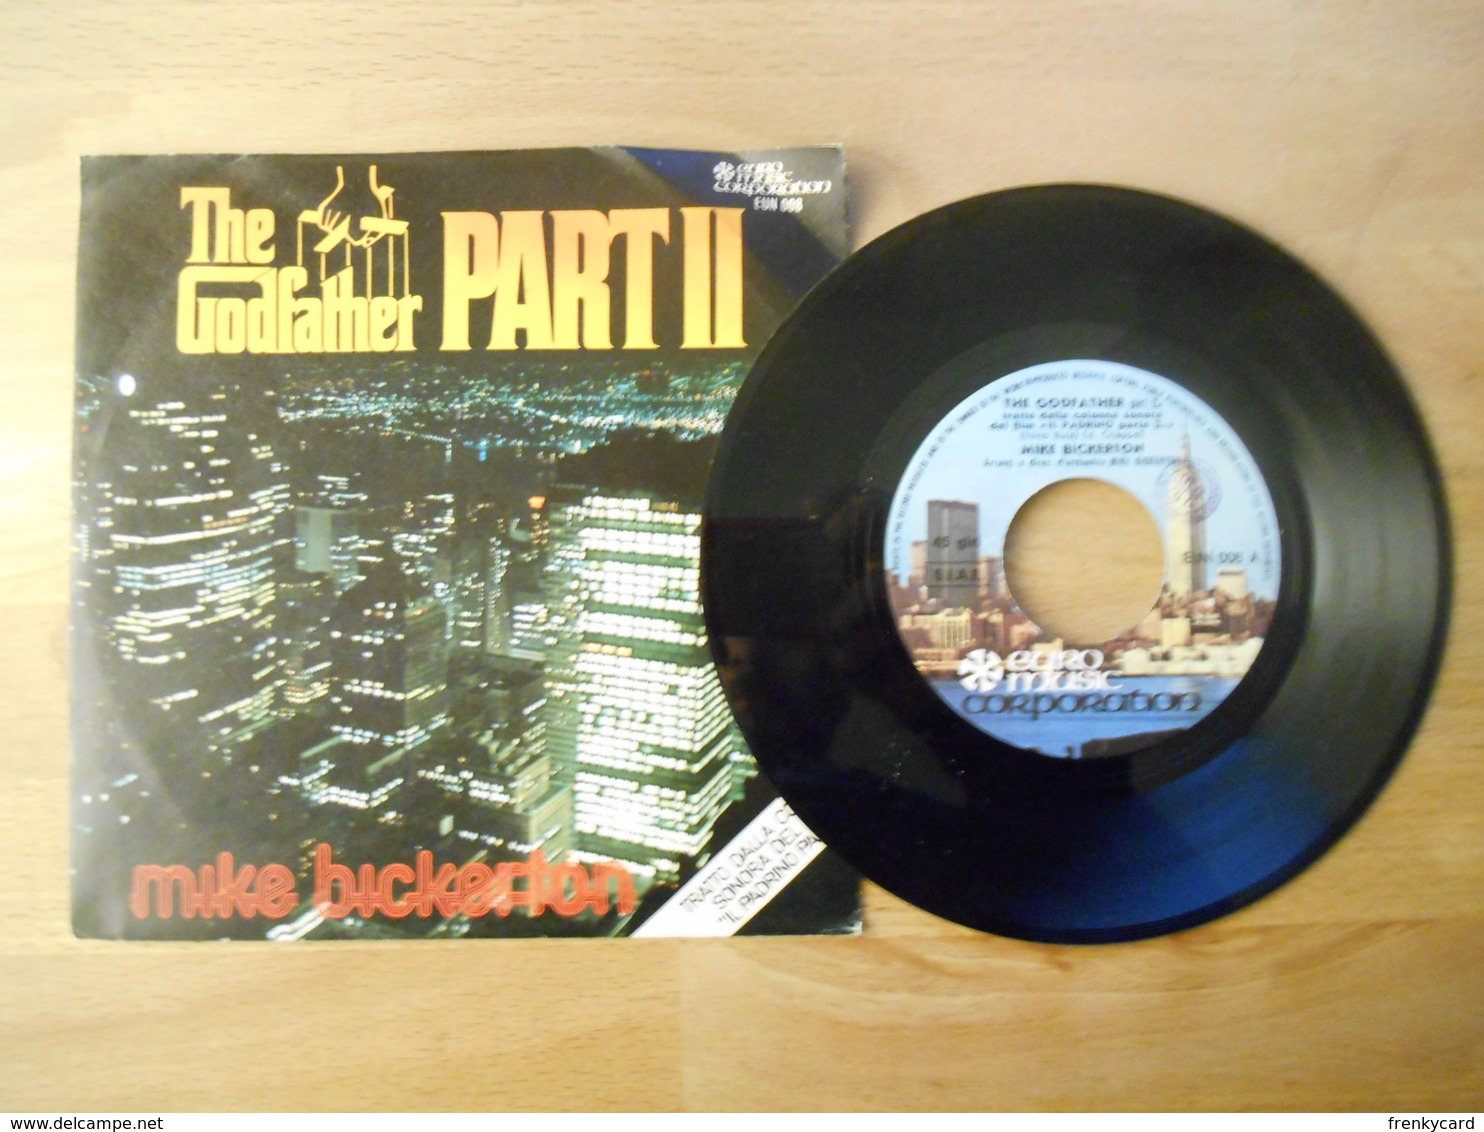 Mike Bickerton - The Godfather Part Ll - 45 G - Maxi-Single